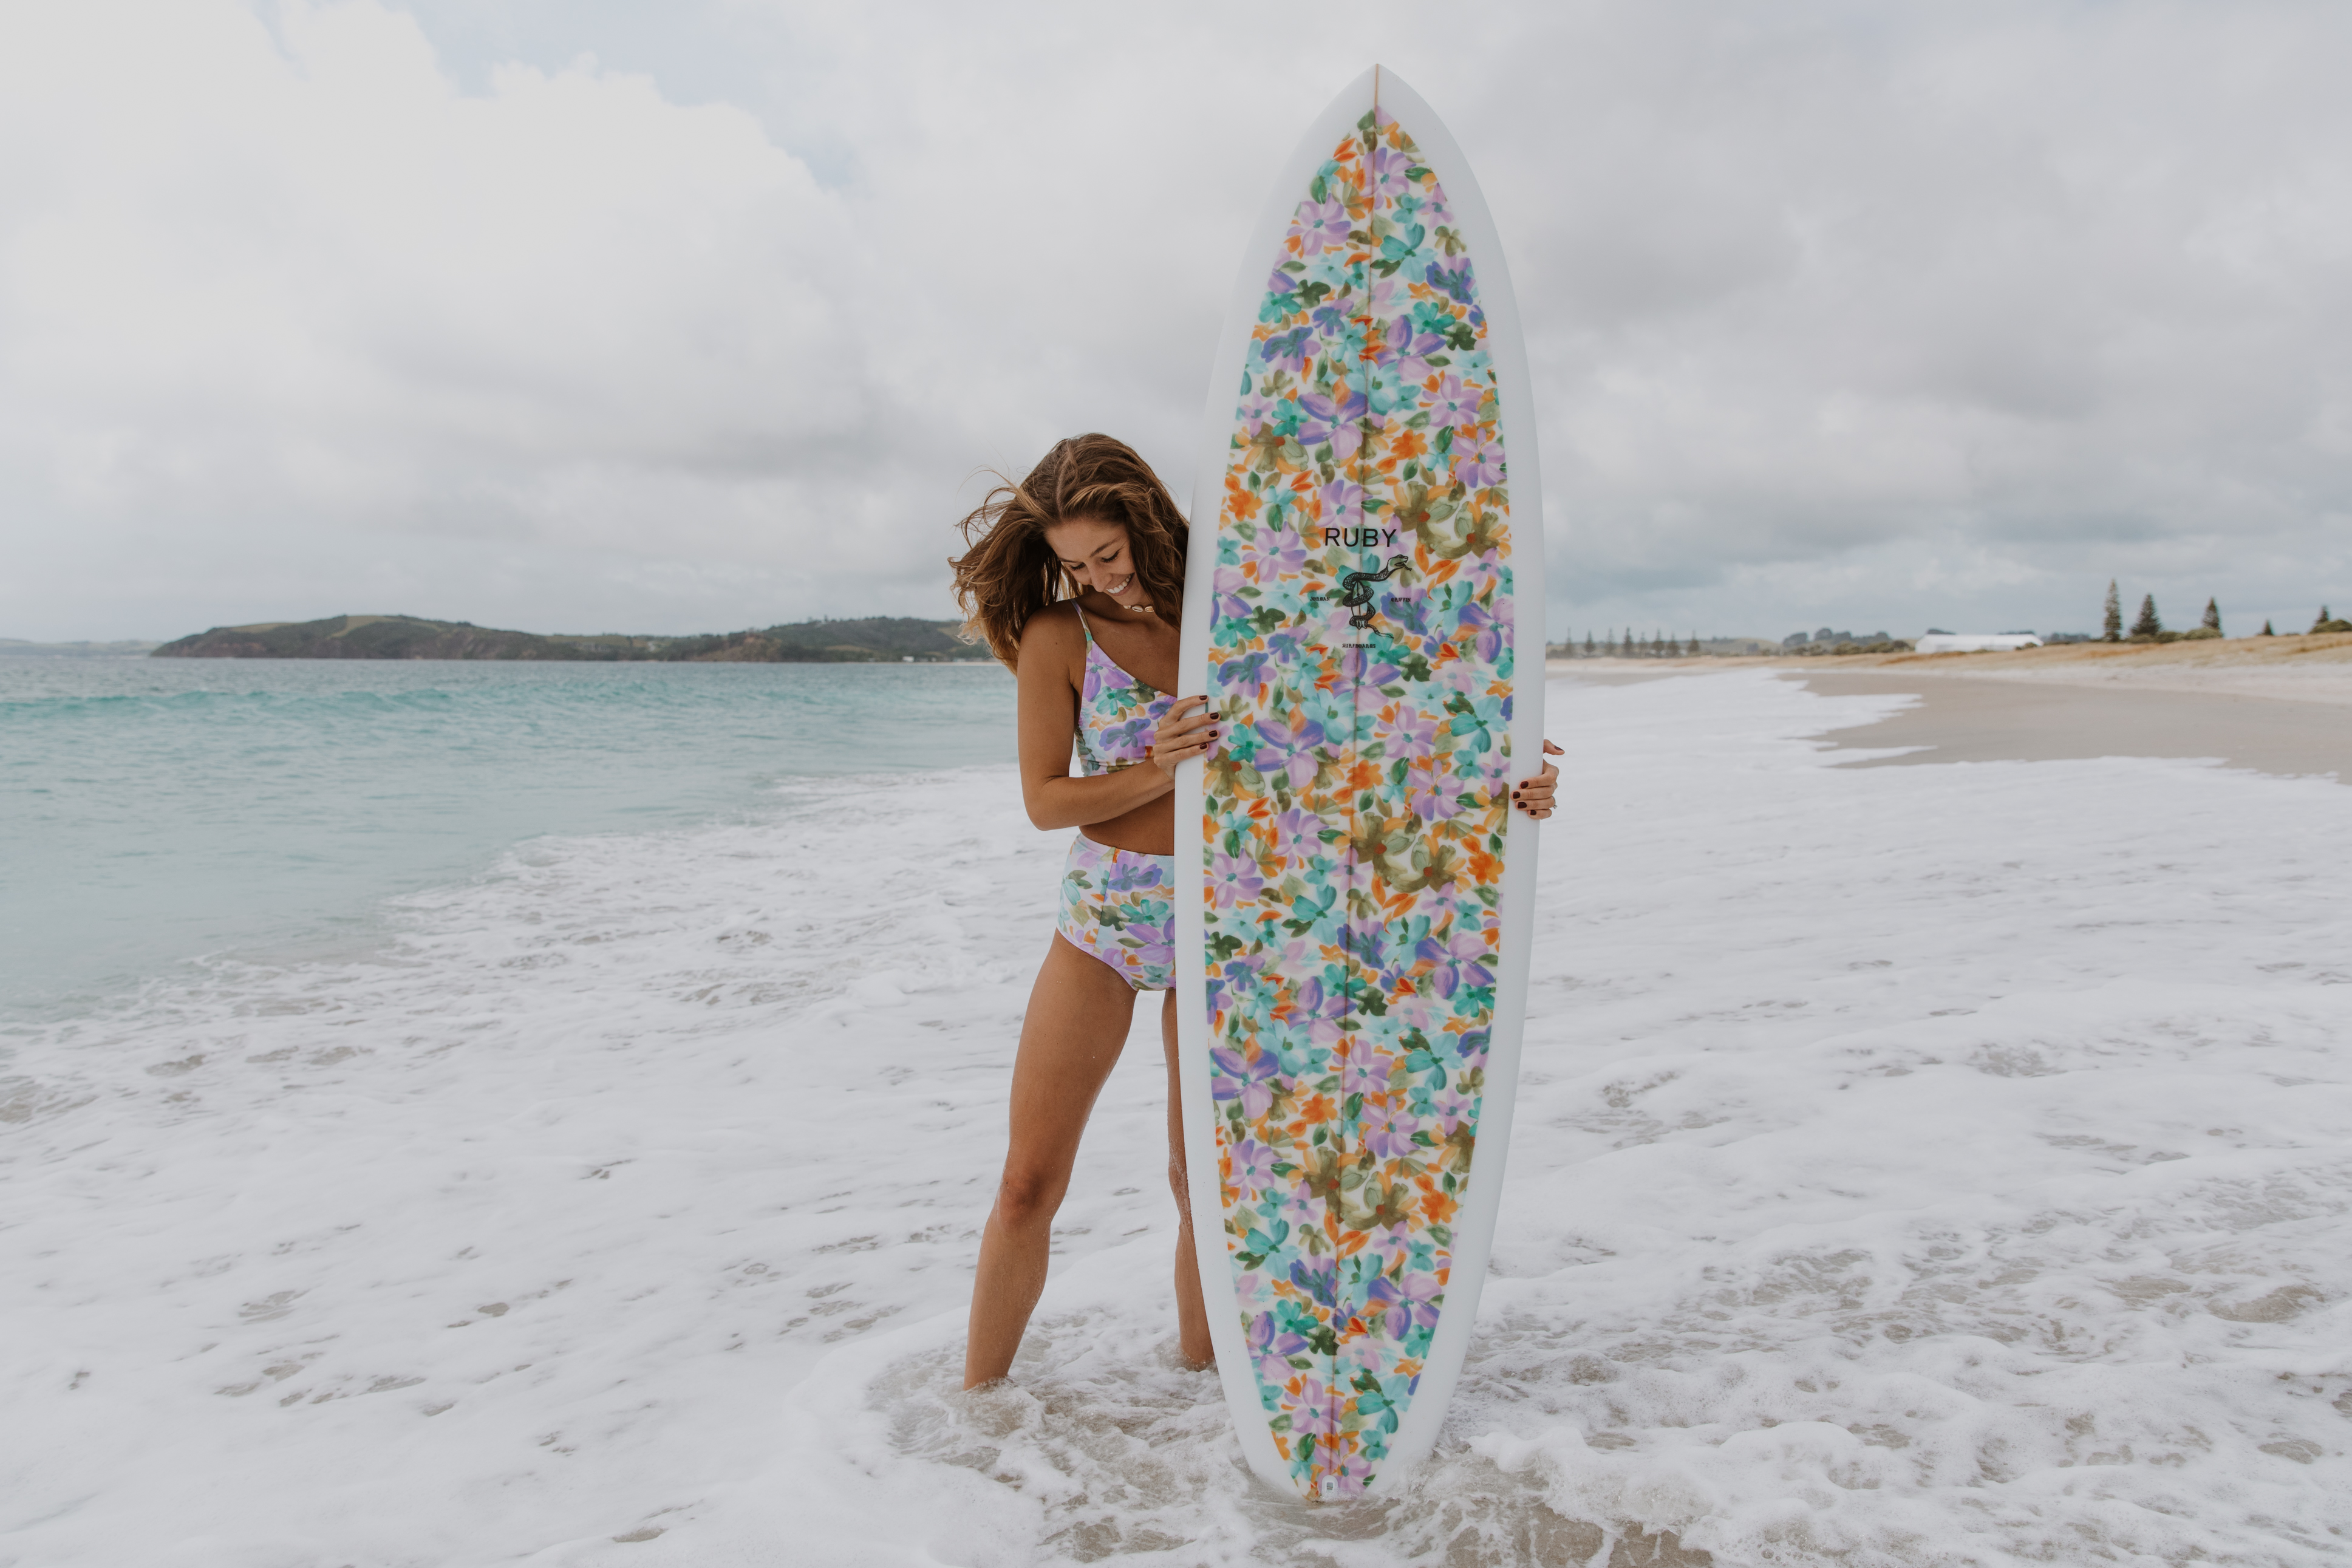 mODEL POSING WITH ruby BRANDED SURFBOARD ON BEACH